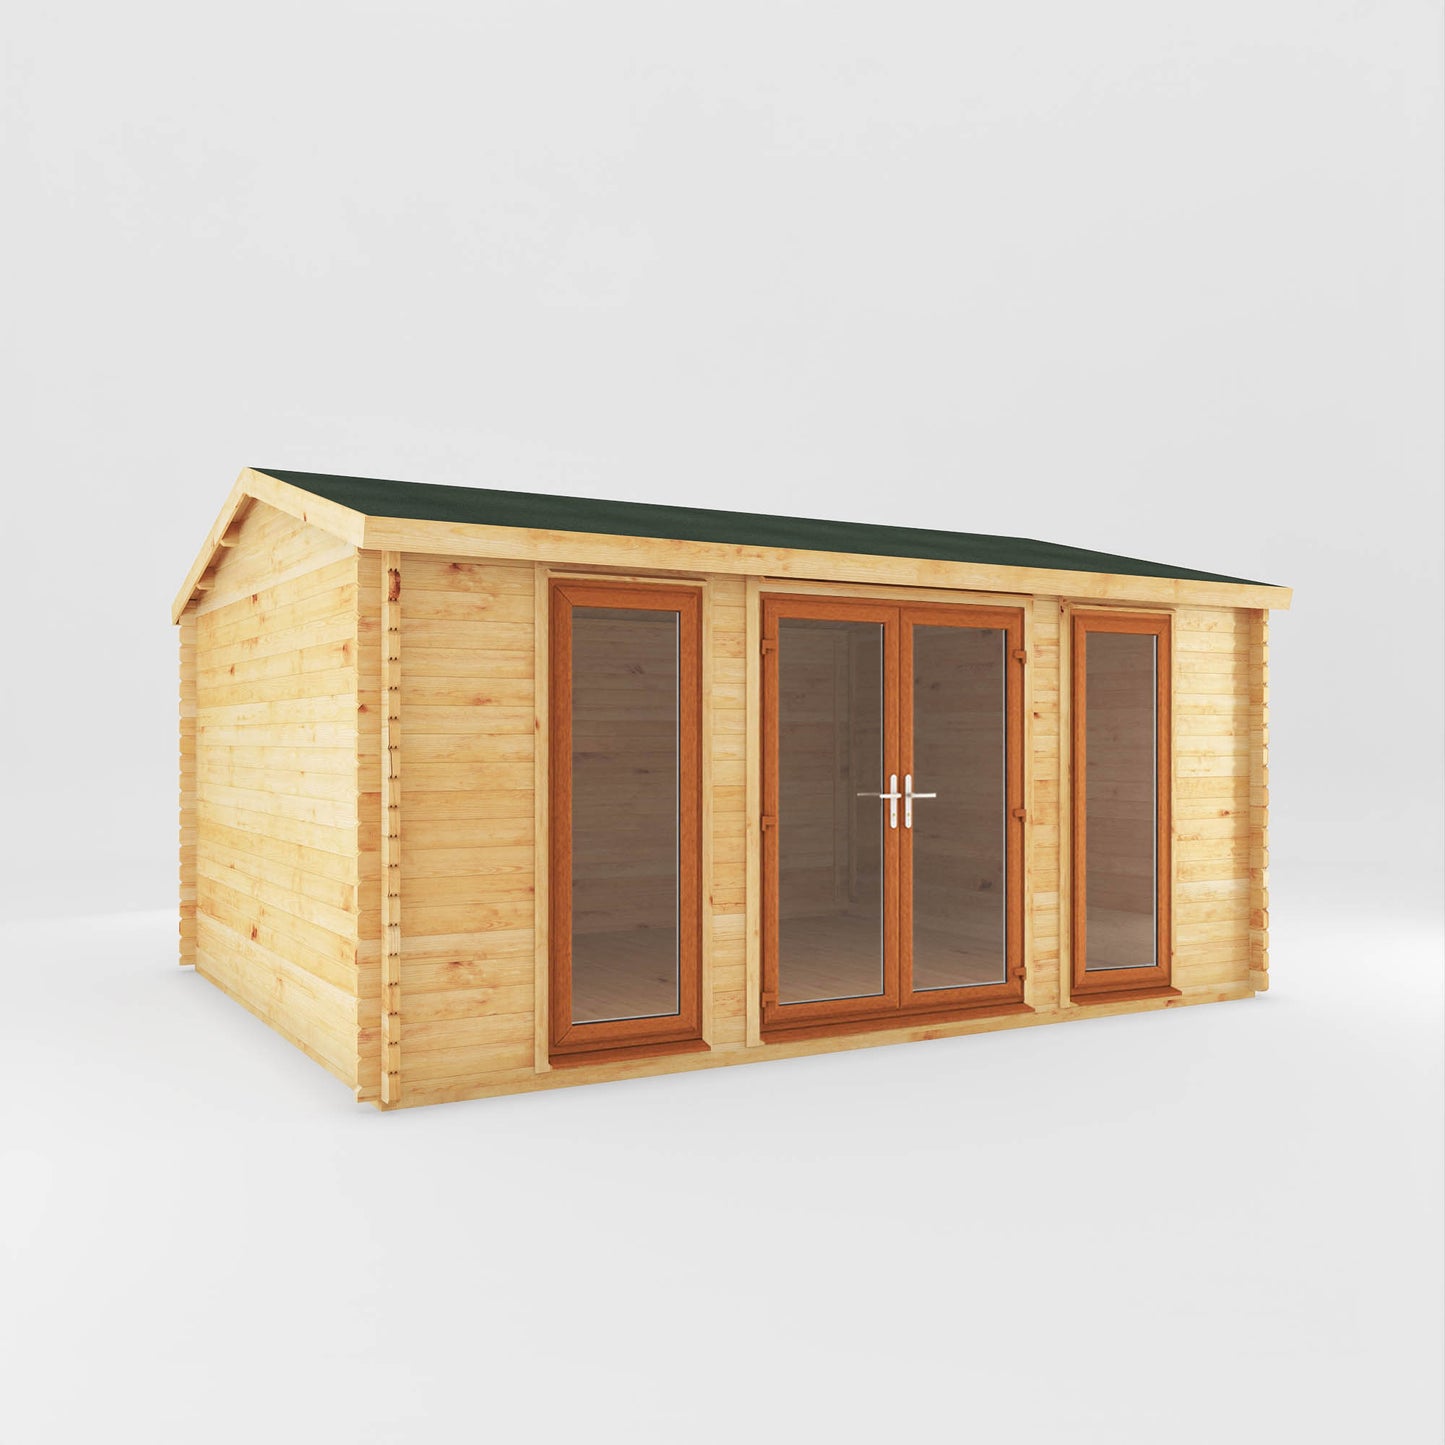 The 5m x 4m  Dove Log Cabin with Oak UPVC